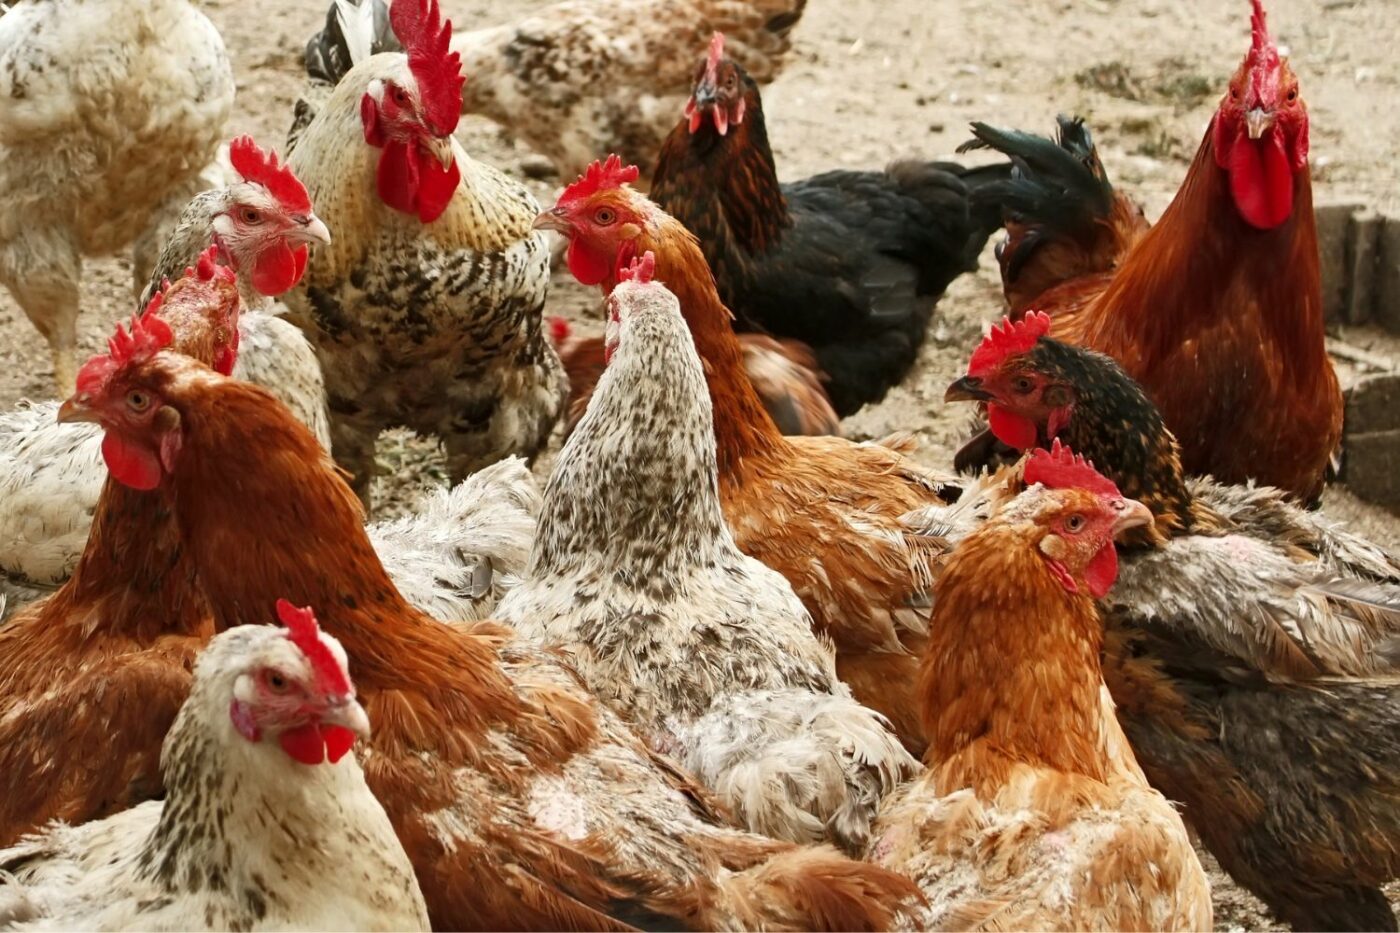 3 Best Chicken Breeds to Raise for Meat - Strombergs